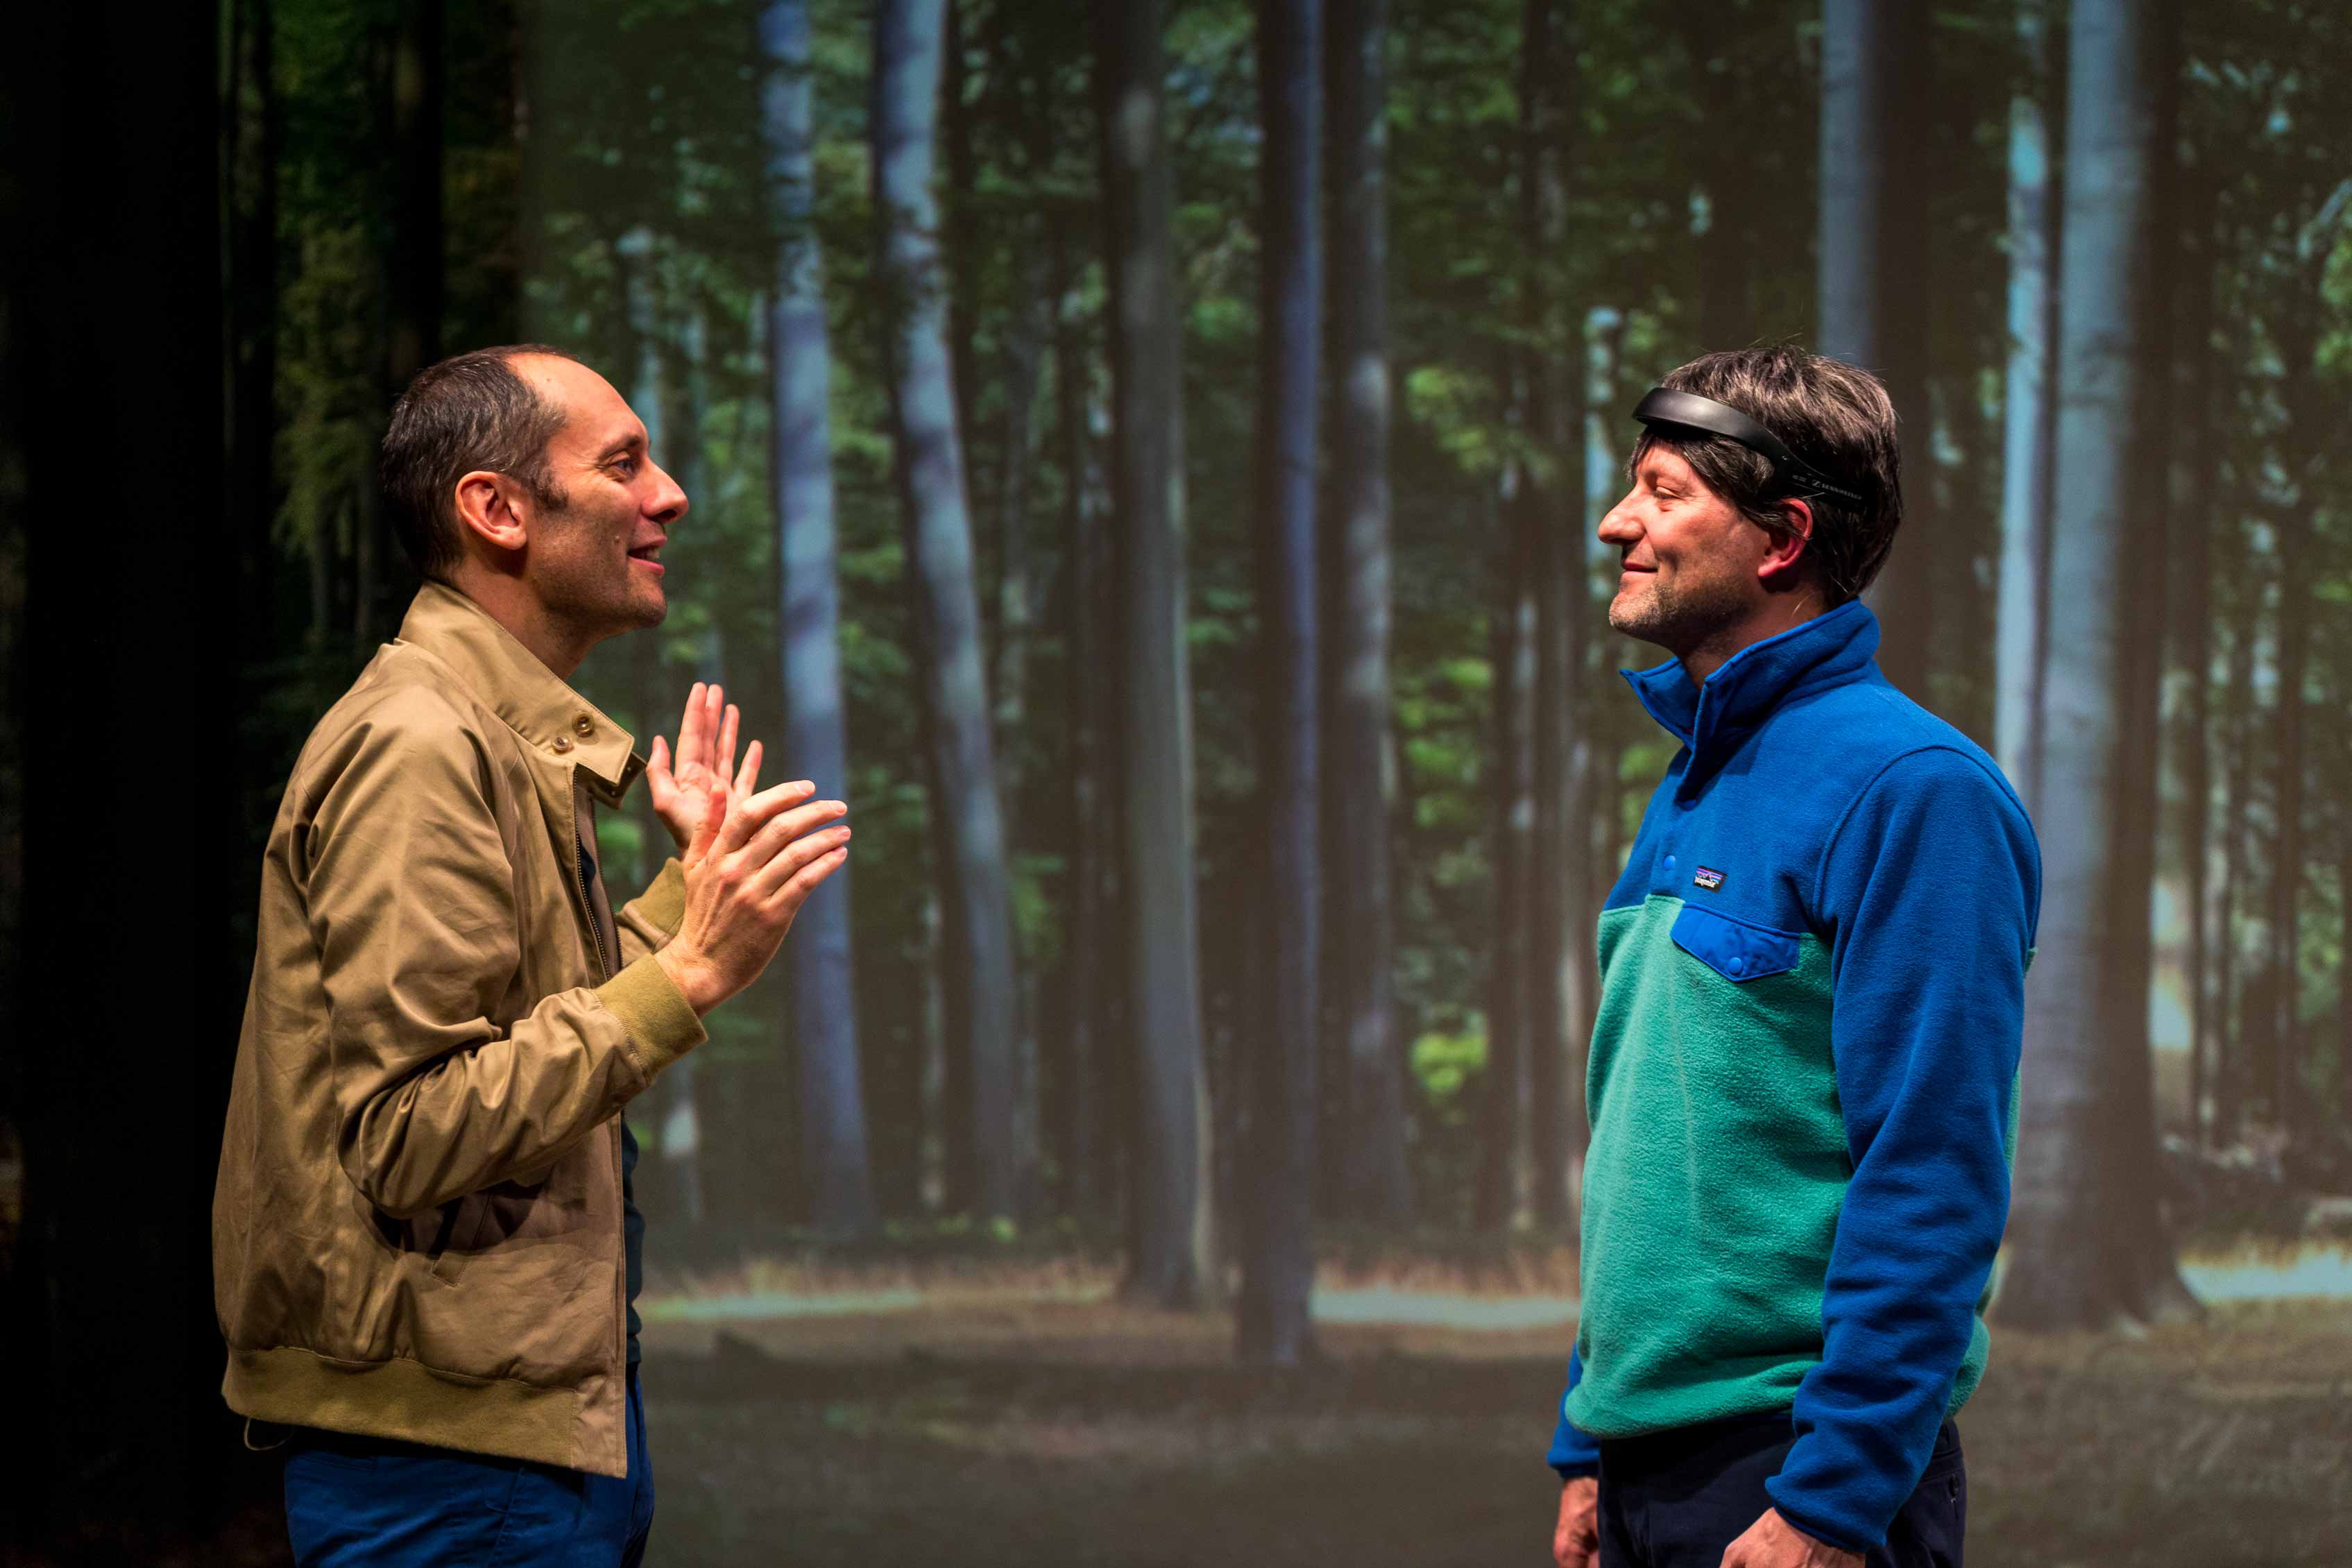 Taylor (Antoine Defoort) and Michel (Alexandre Le Nours) in the forest